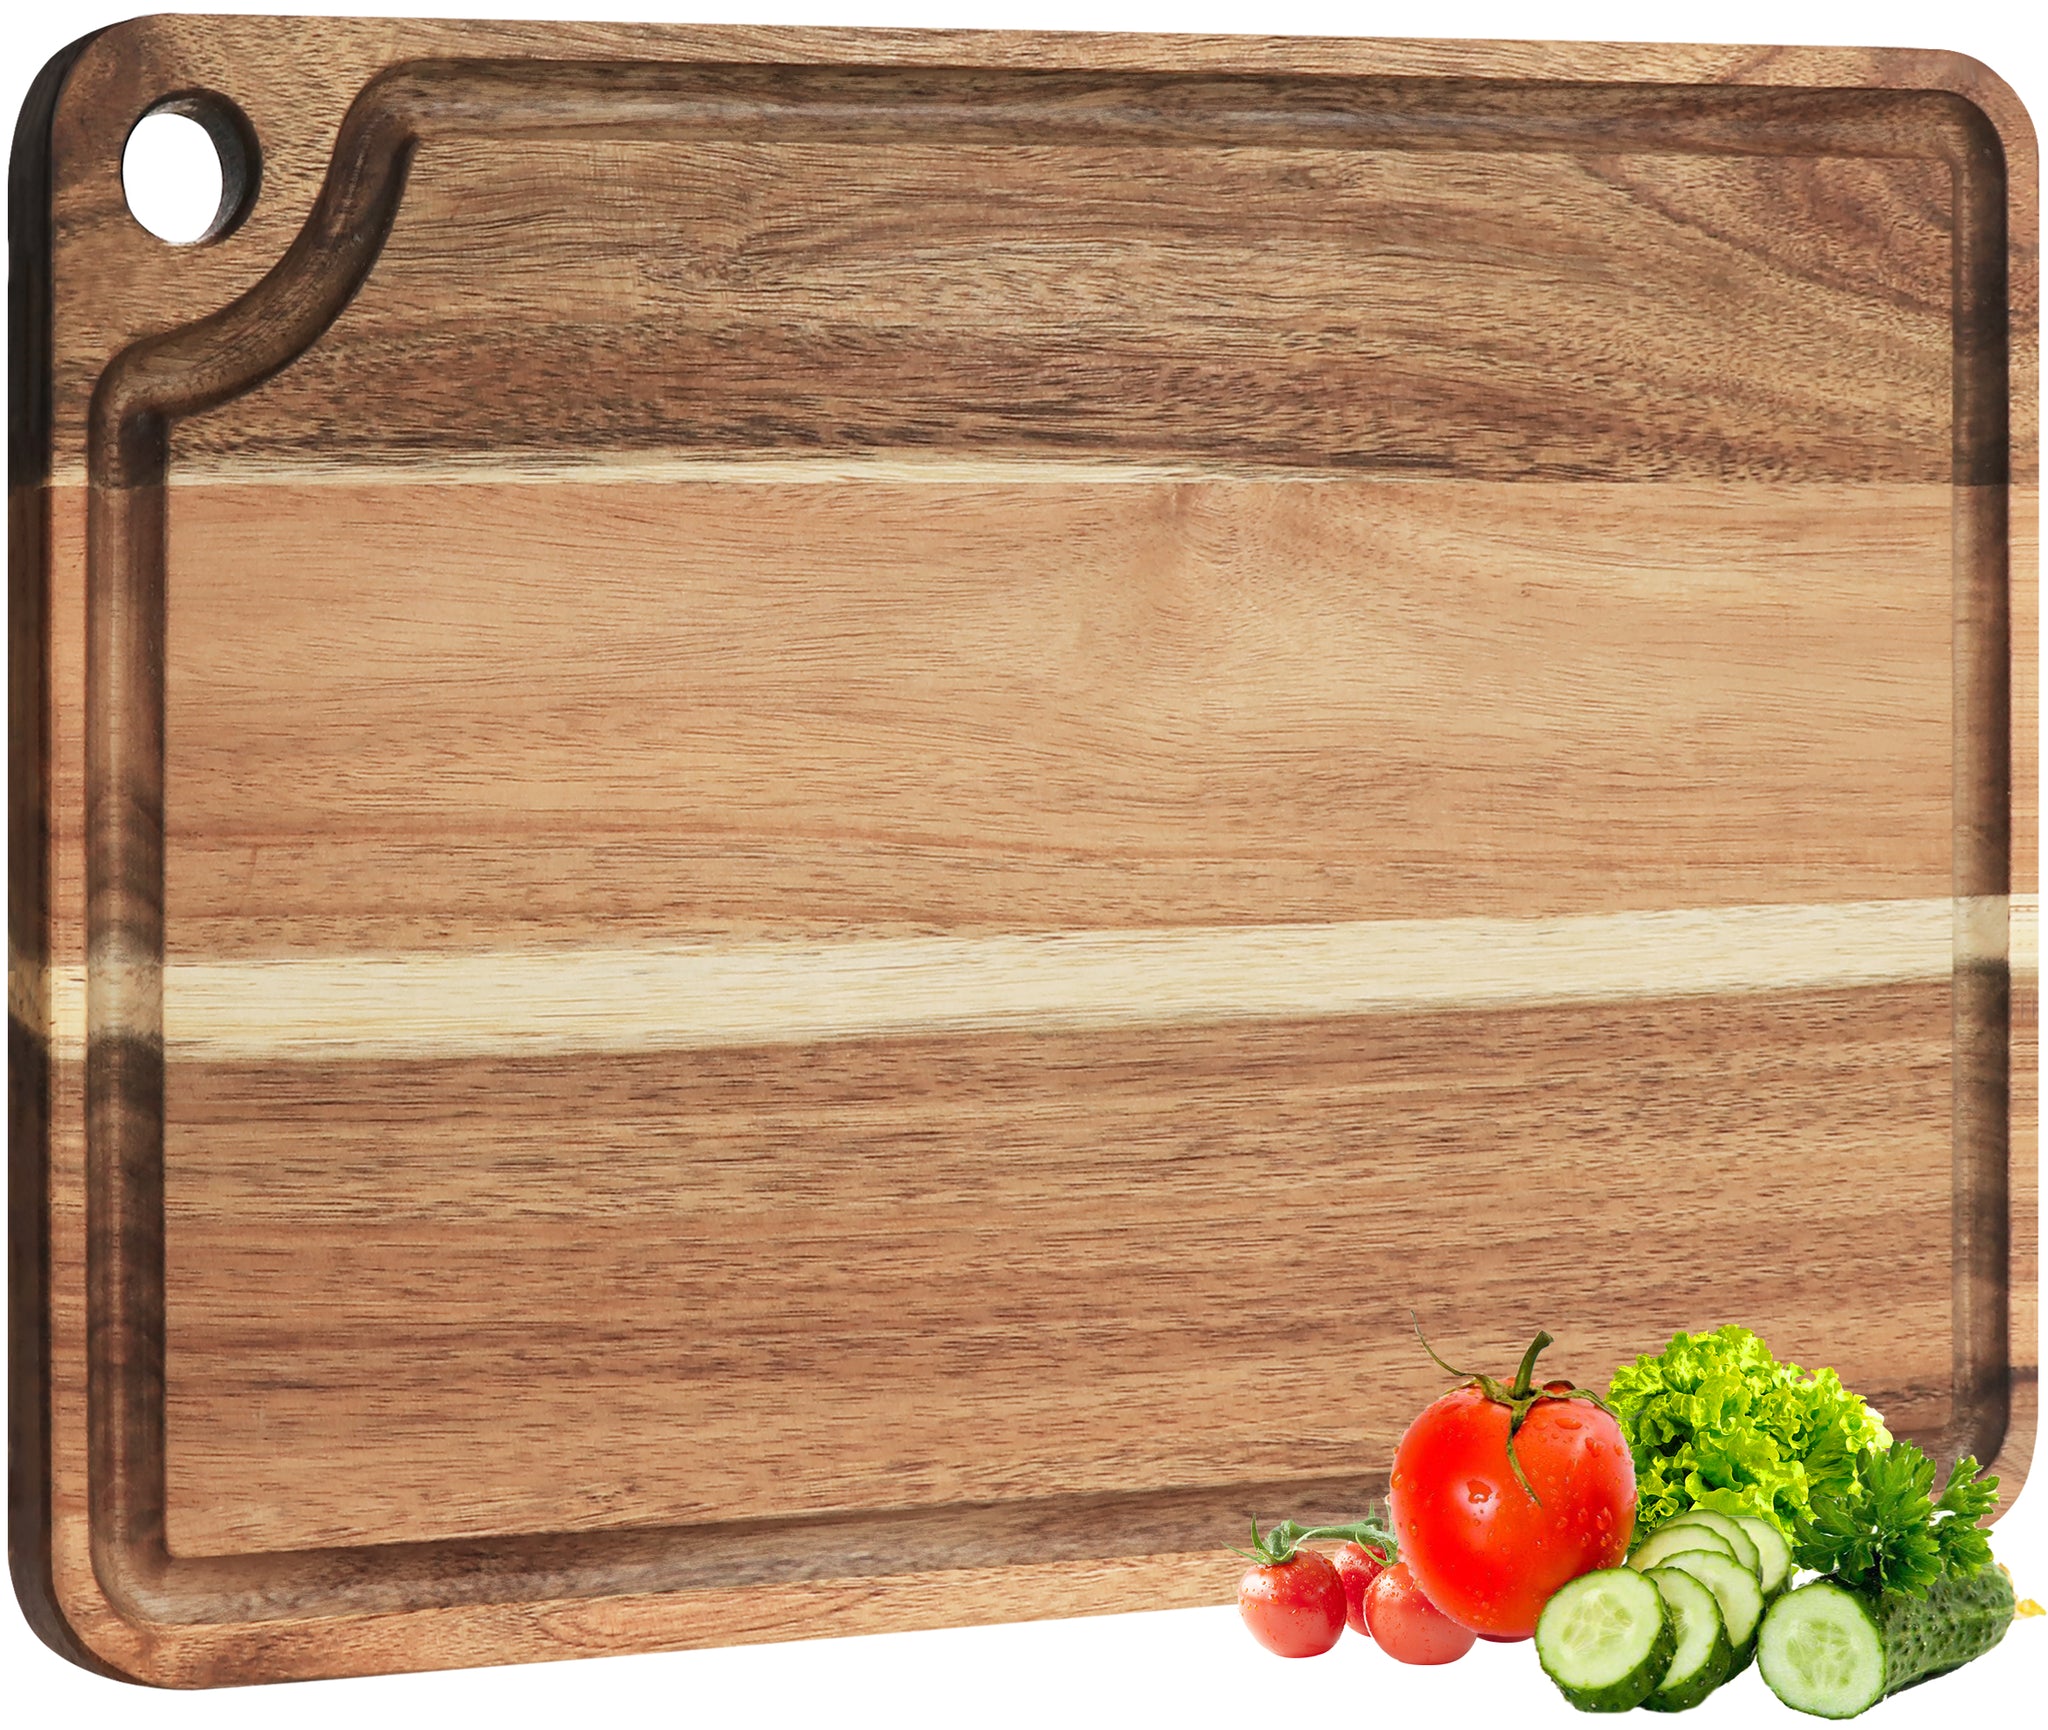 Westhaven 18.9 x 12.8 in. Rectangle Acacia Wood Cutting Board